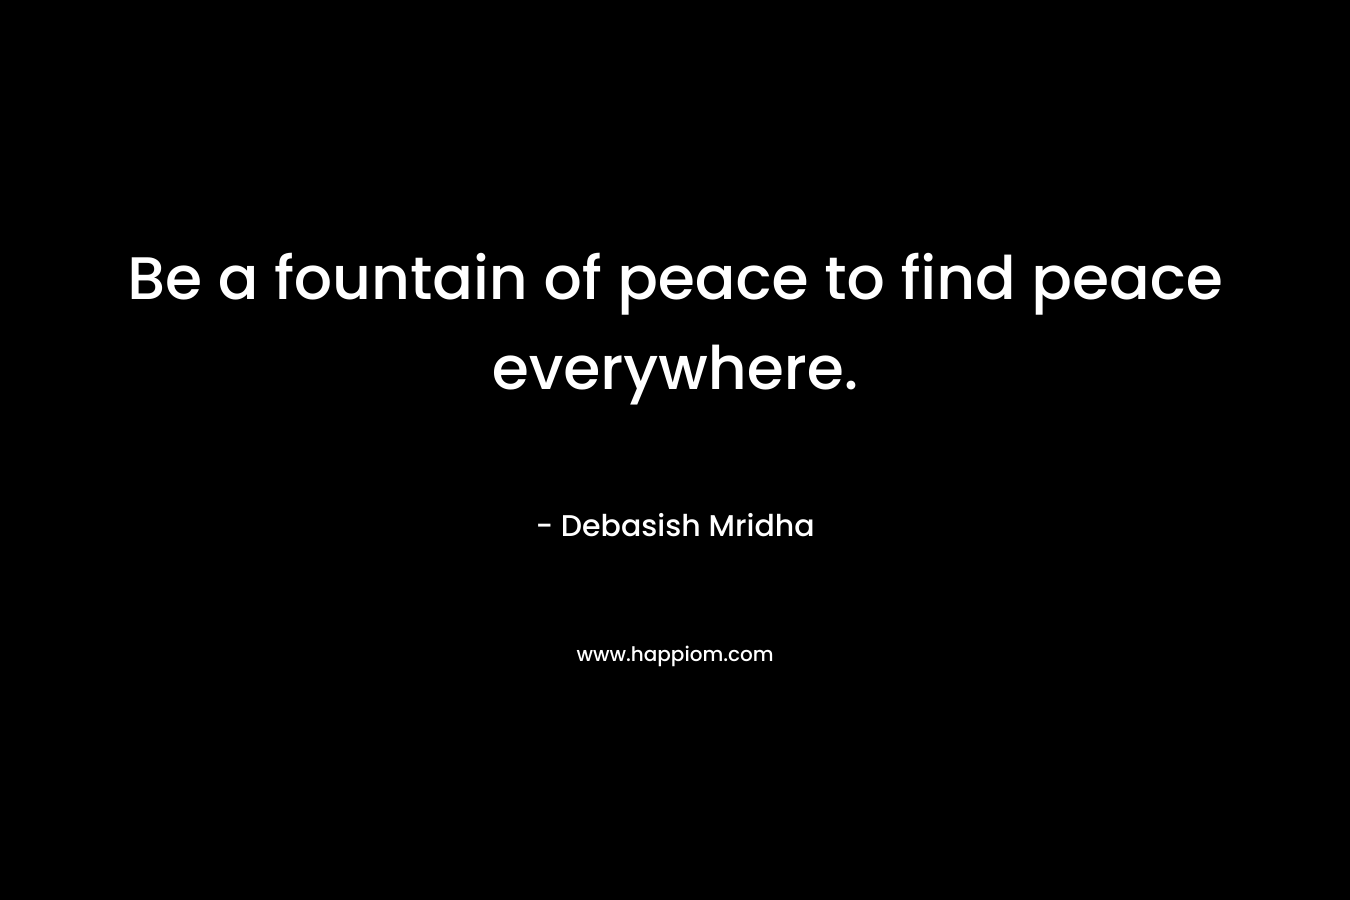 Be a fountain of peace to find peace everywhere.